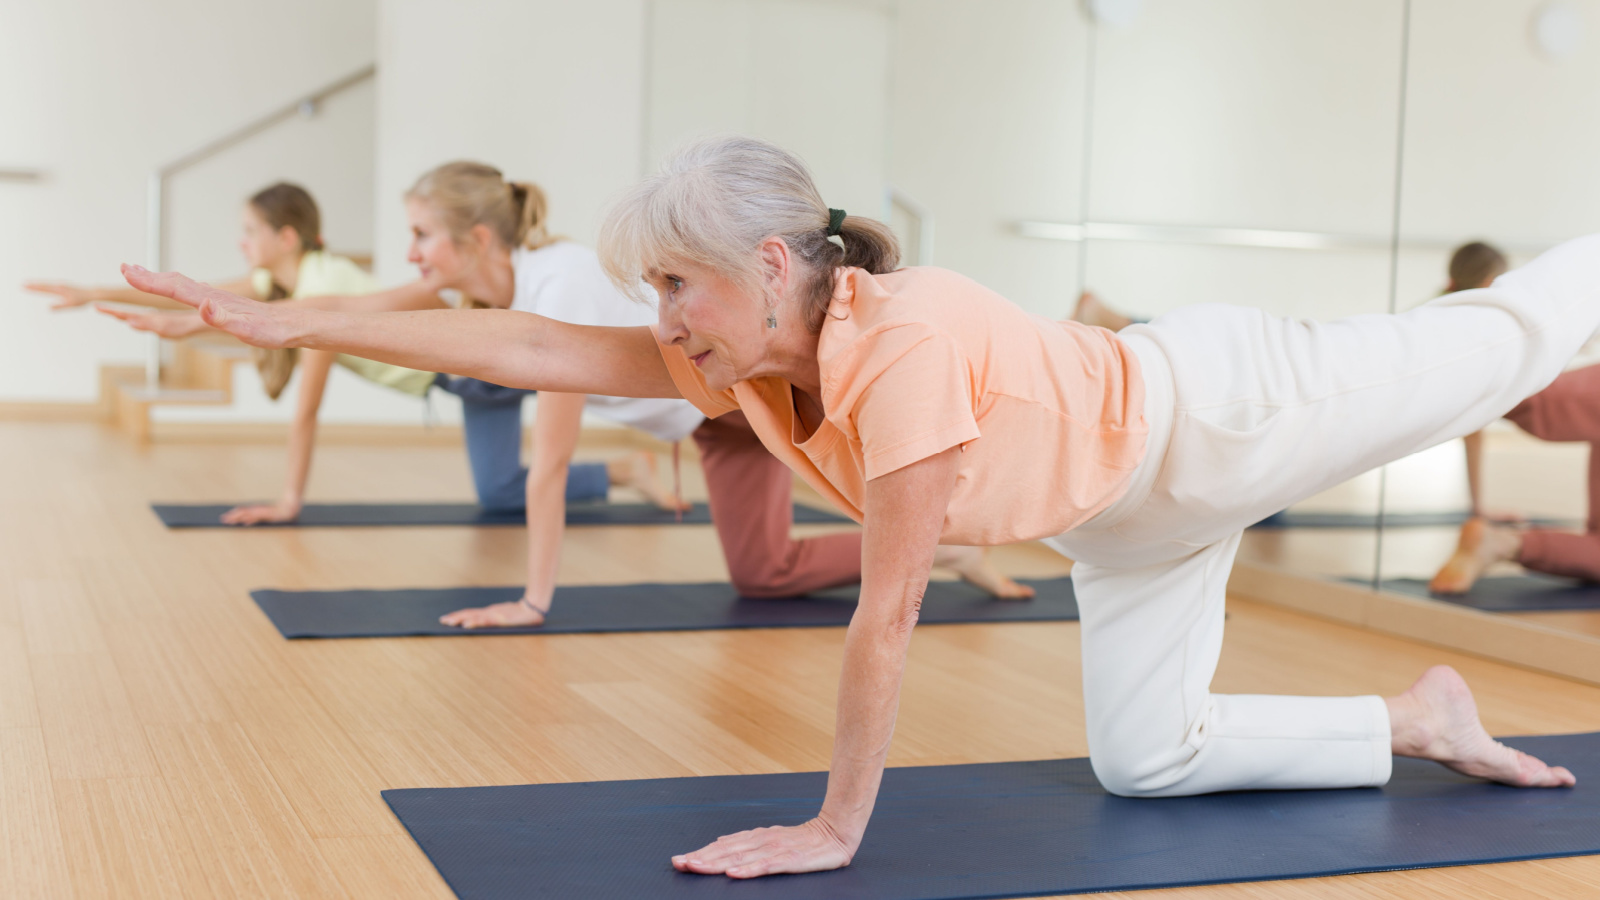 image credit: BearFotos/Shutterstock <p><span>Stability is key as you age. Balance and core-focused programs engage in exercises that strengthen your core muscles while improving your balance. Each class introduces new, innovative ways to challenge stability, from yoga poses to light dance moves. Enjoy a sense of achievement as your balance and core strength noticeably improve.</span></p>